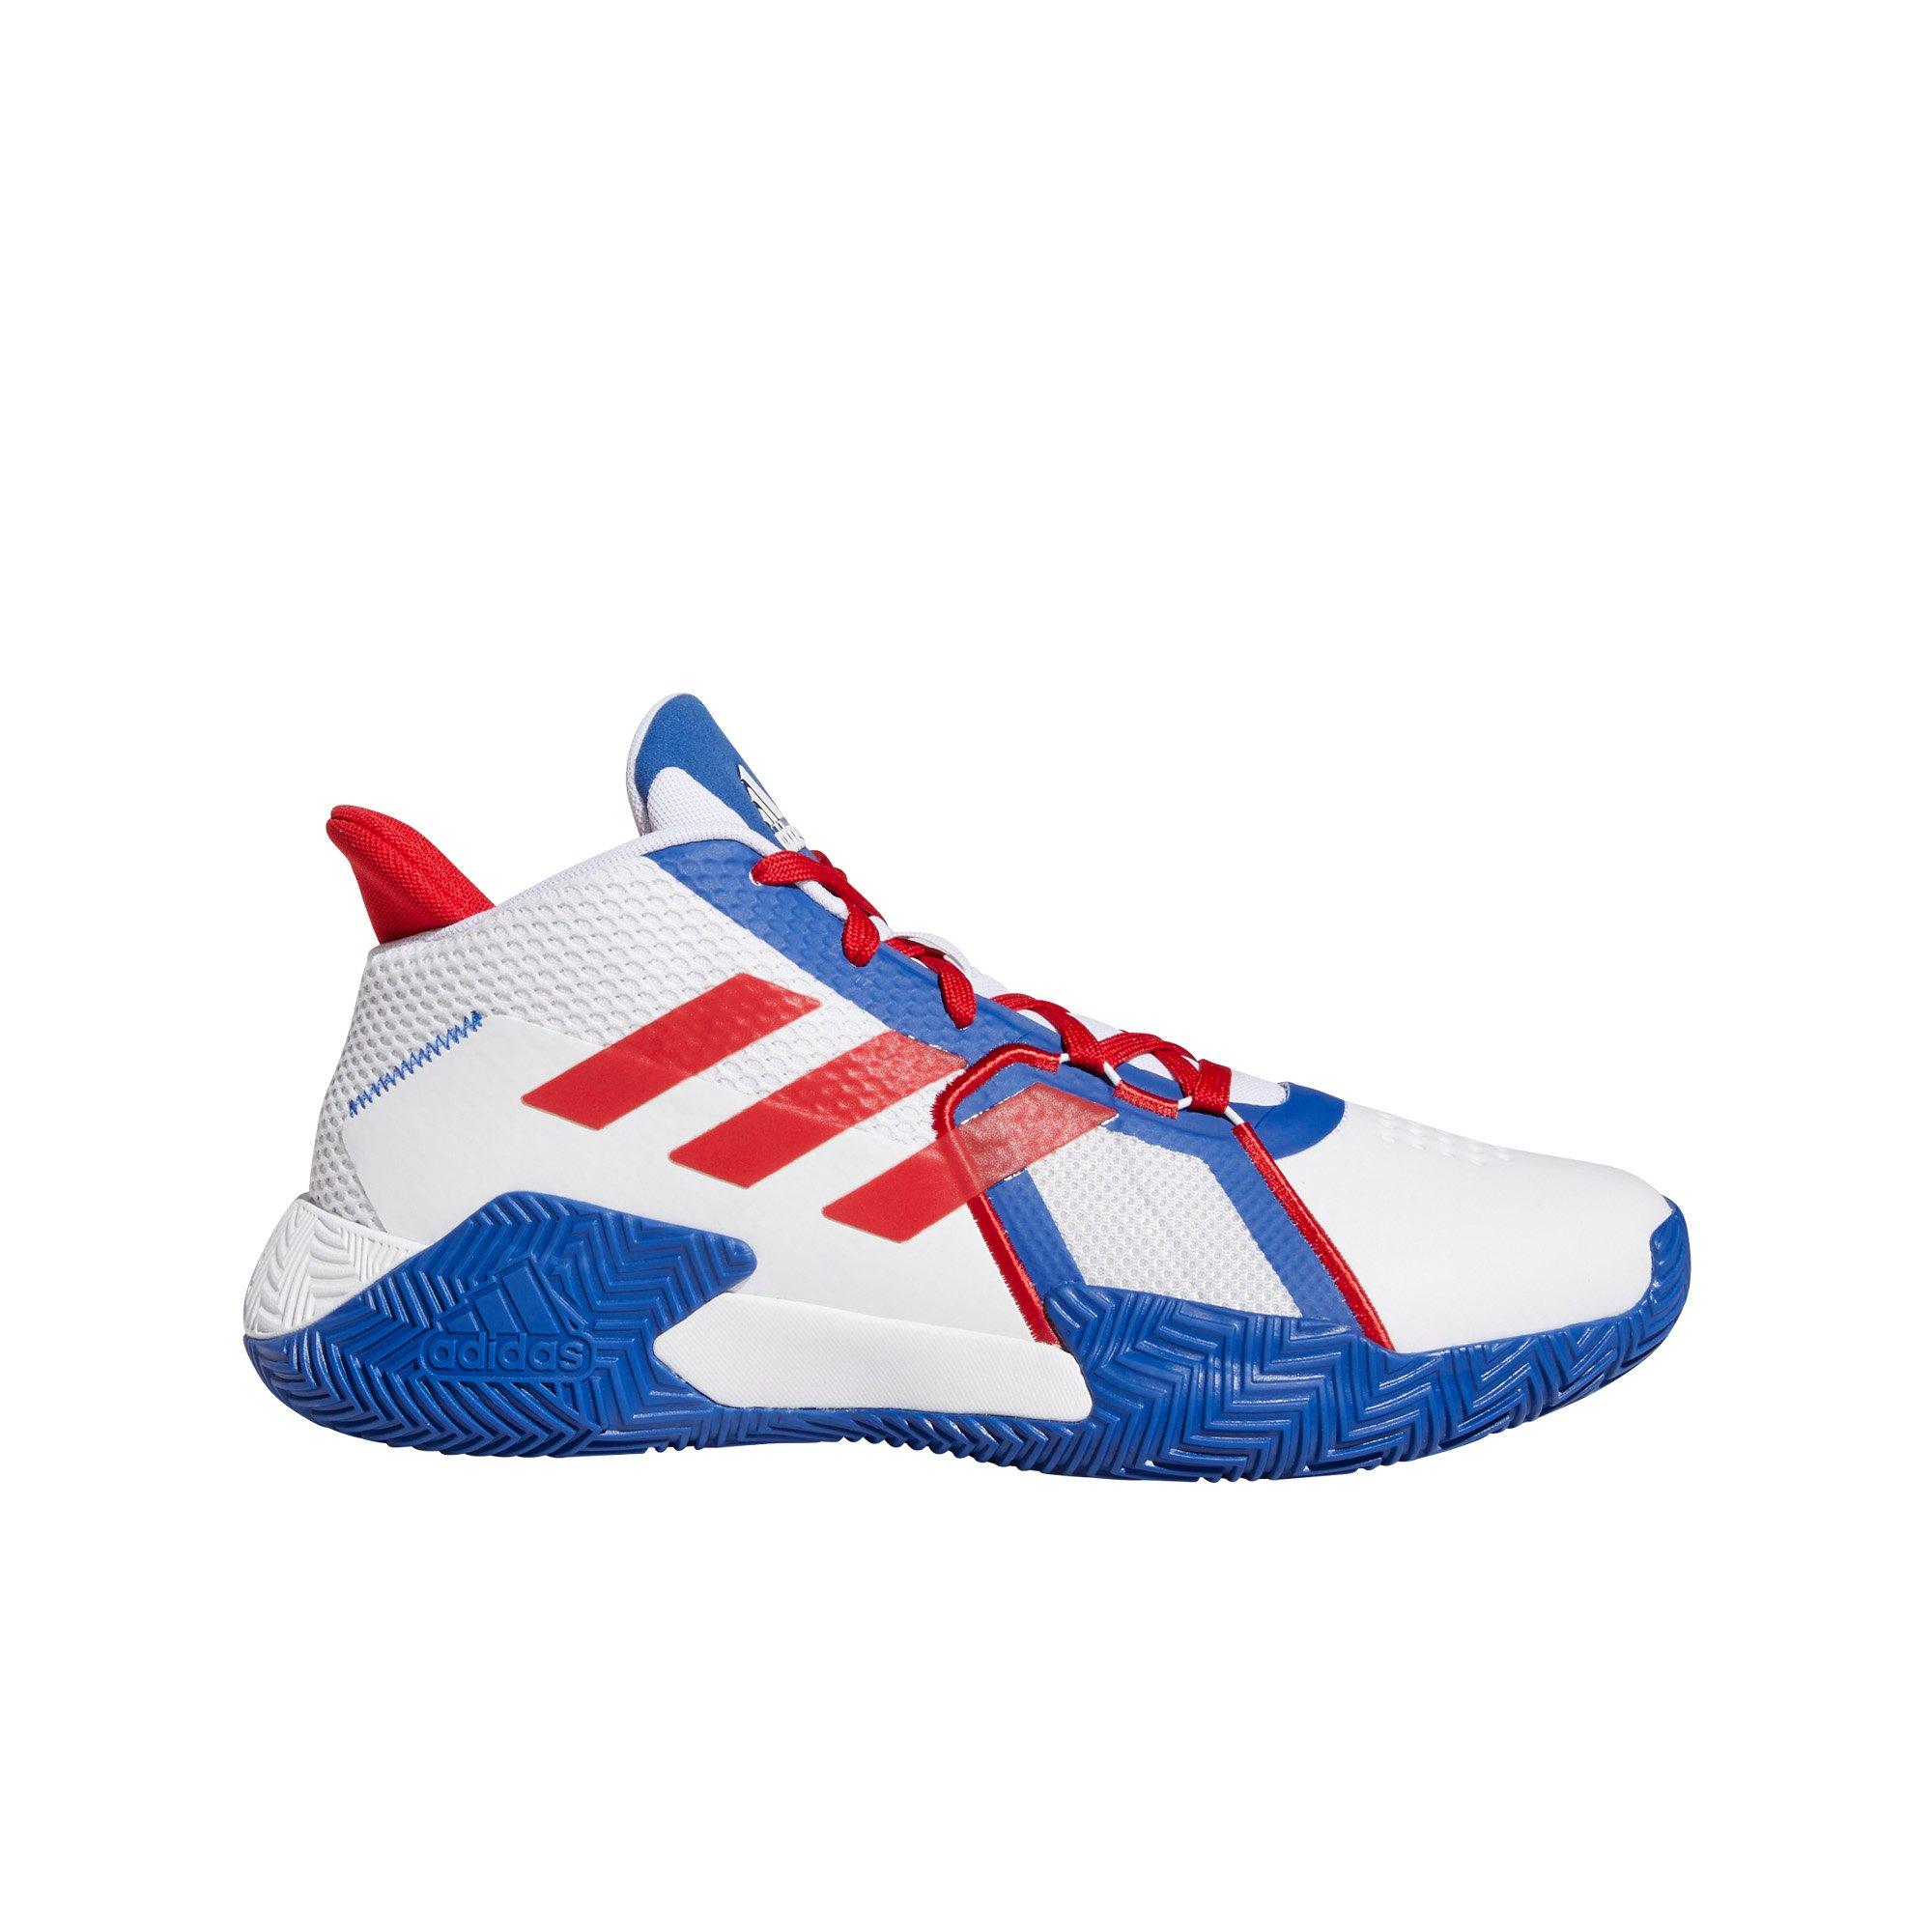 red white blue adidas shoes